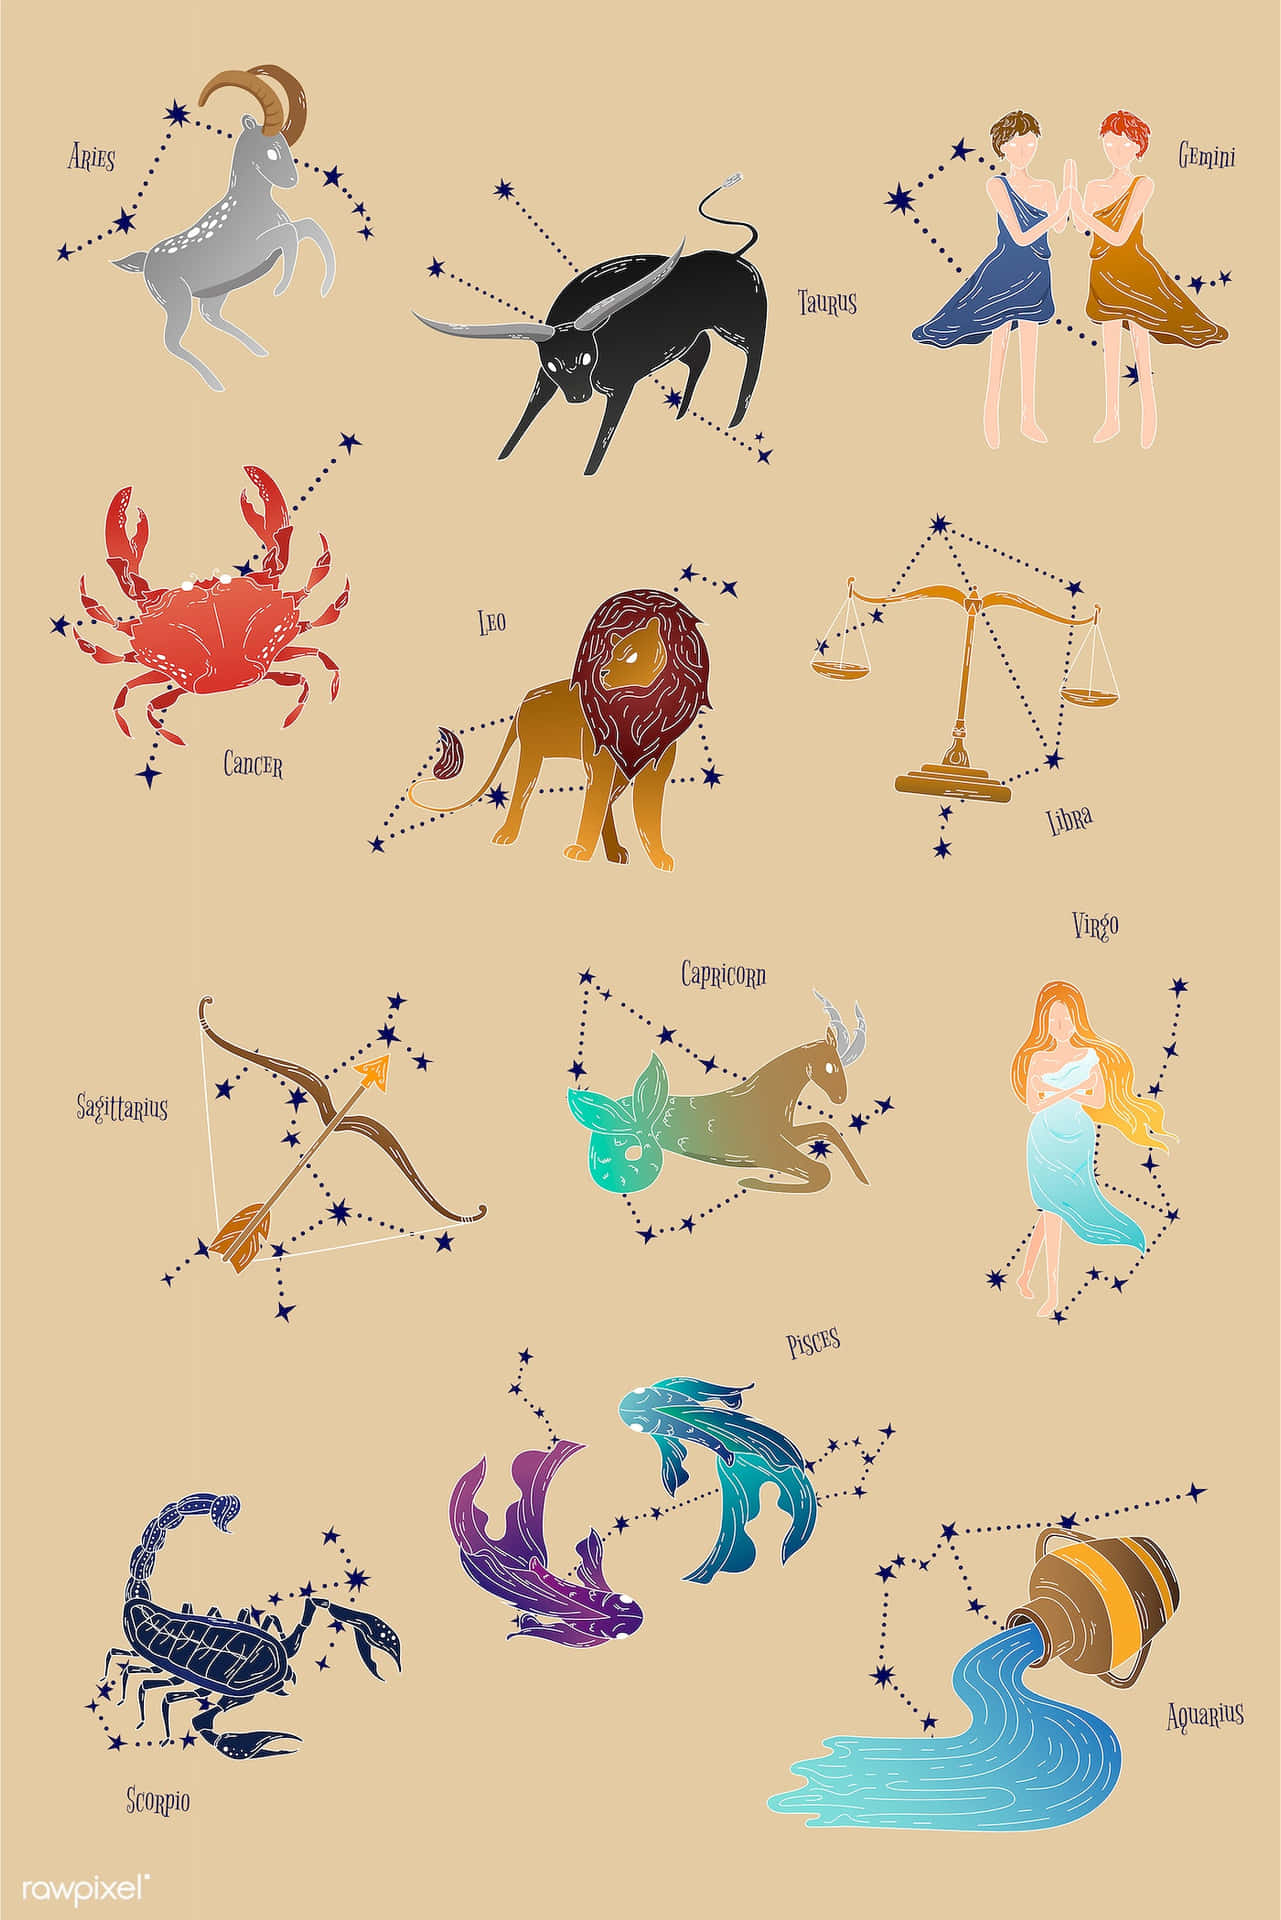 Explore Your Personal Traits and Characteristics with Your Zodiac Sign